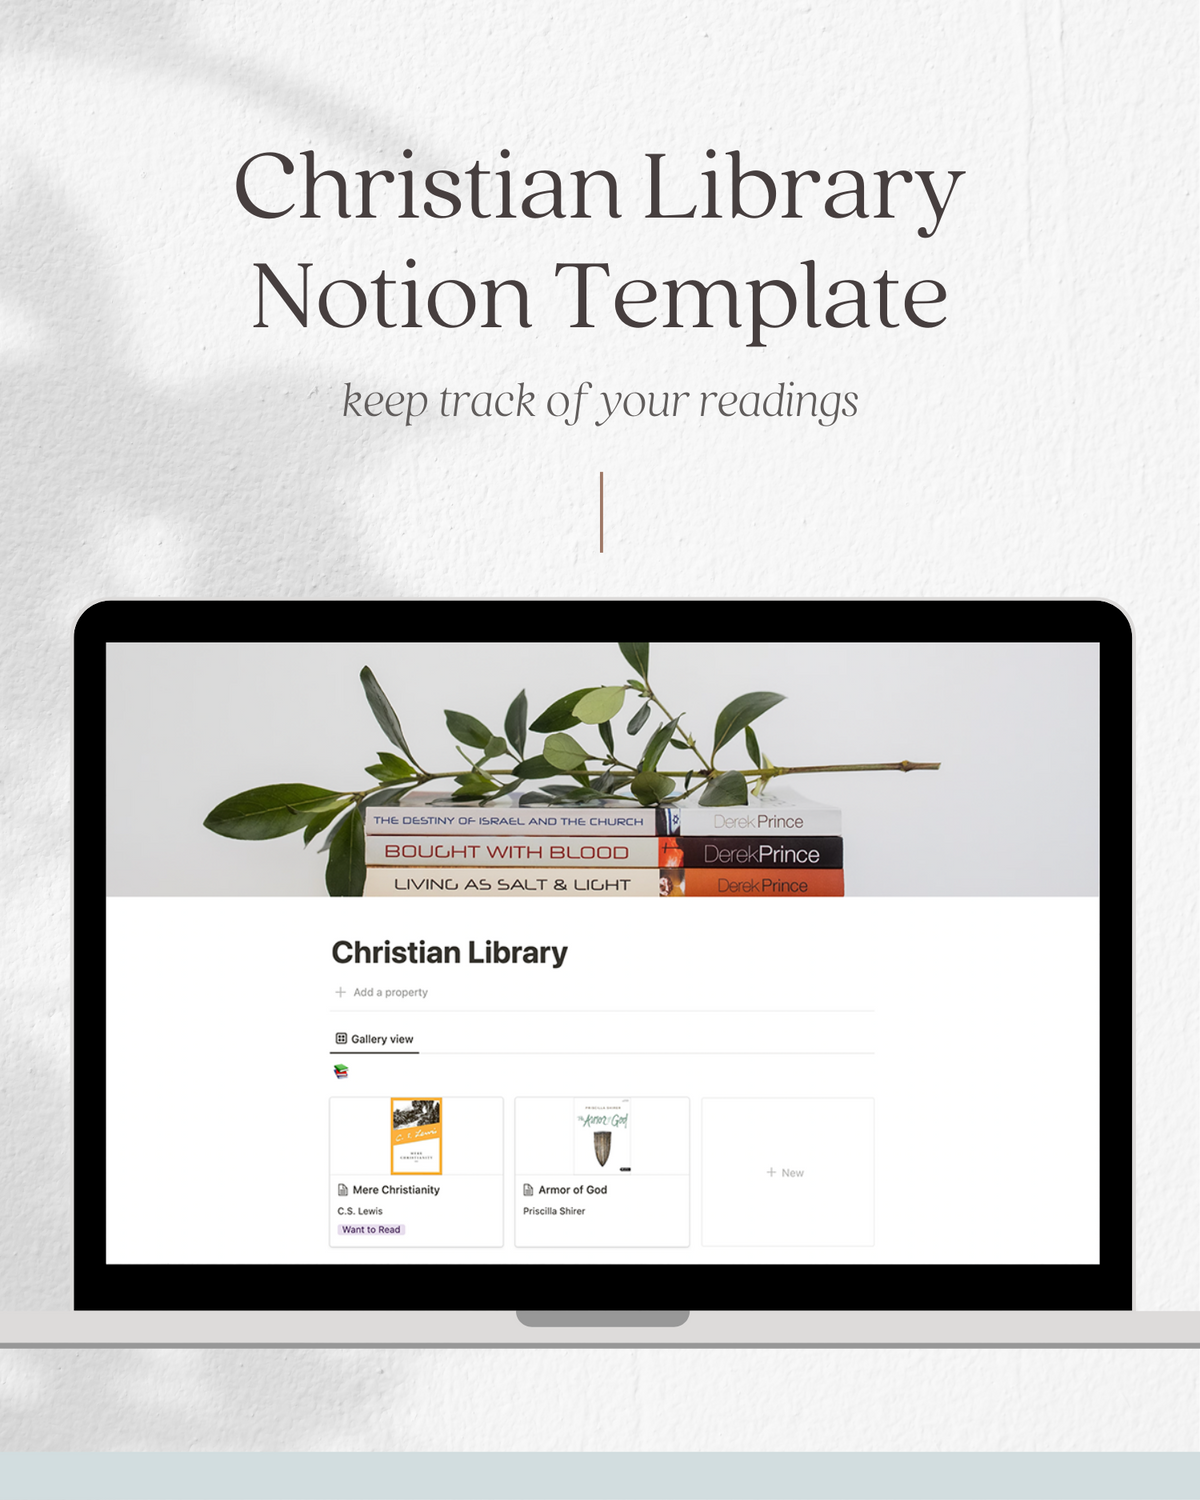 Christian Library - Notion Template